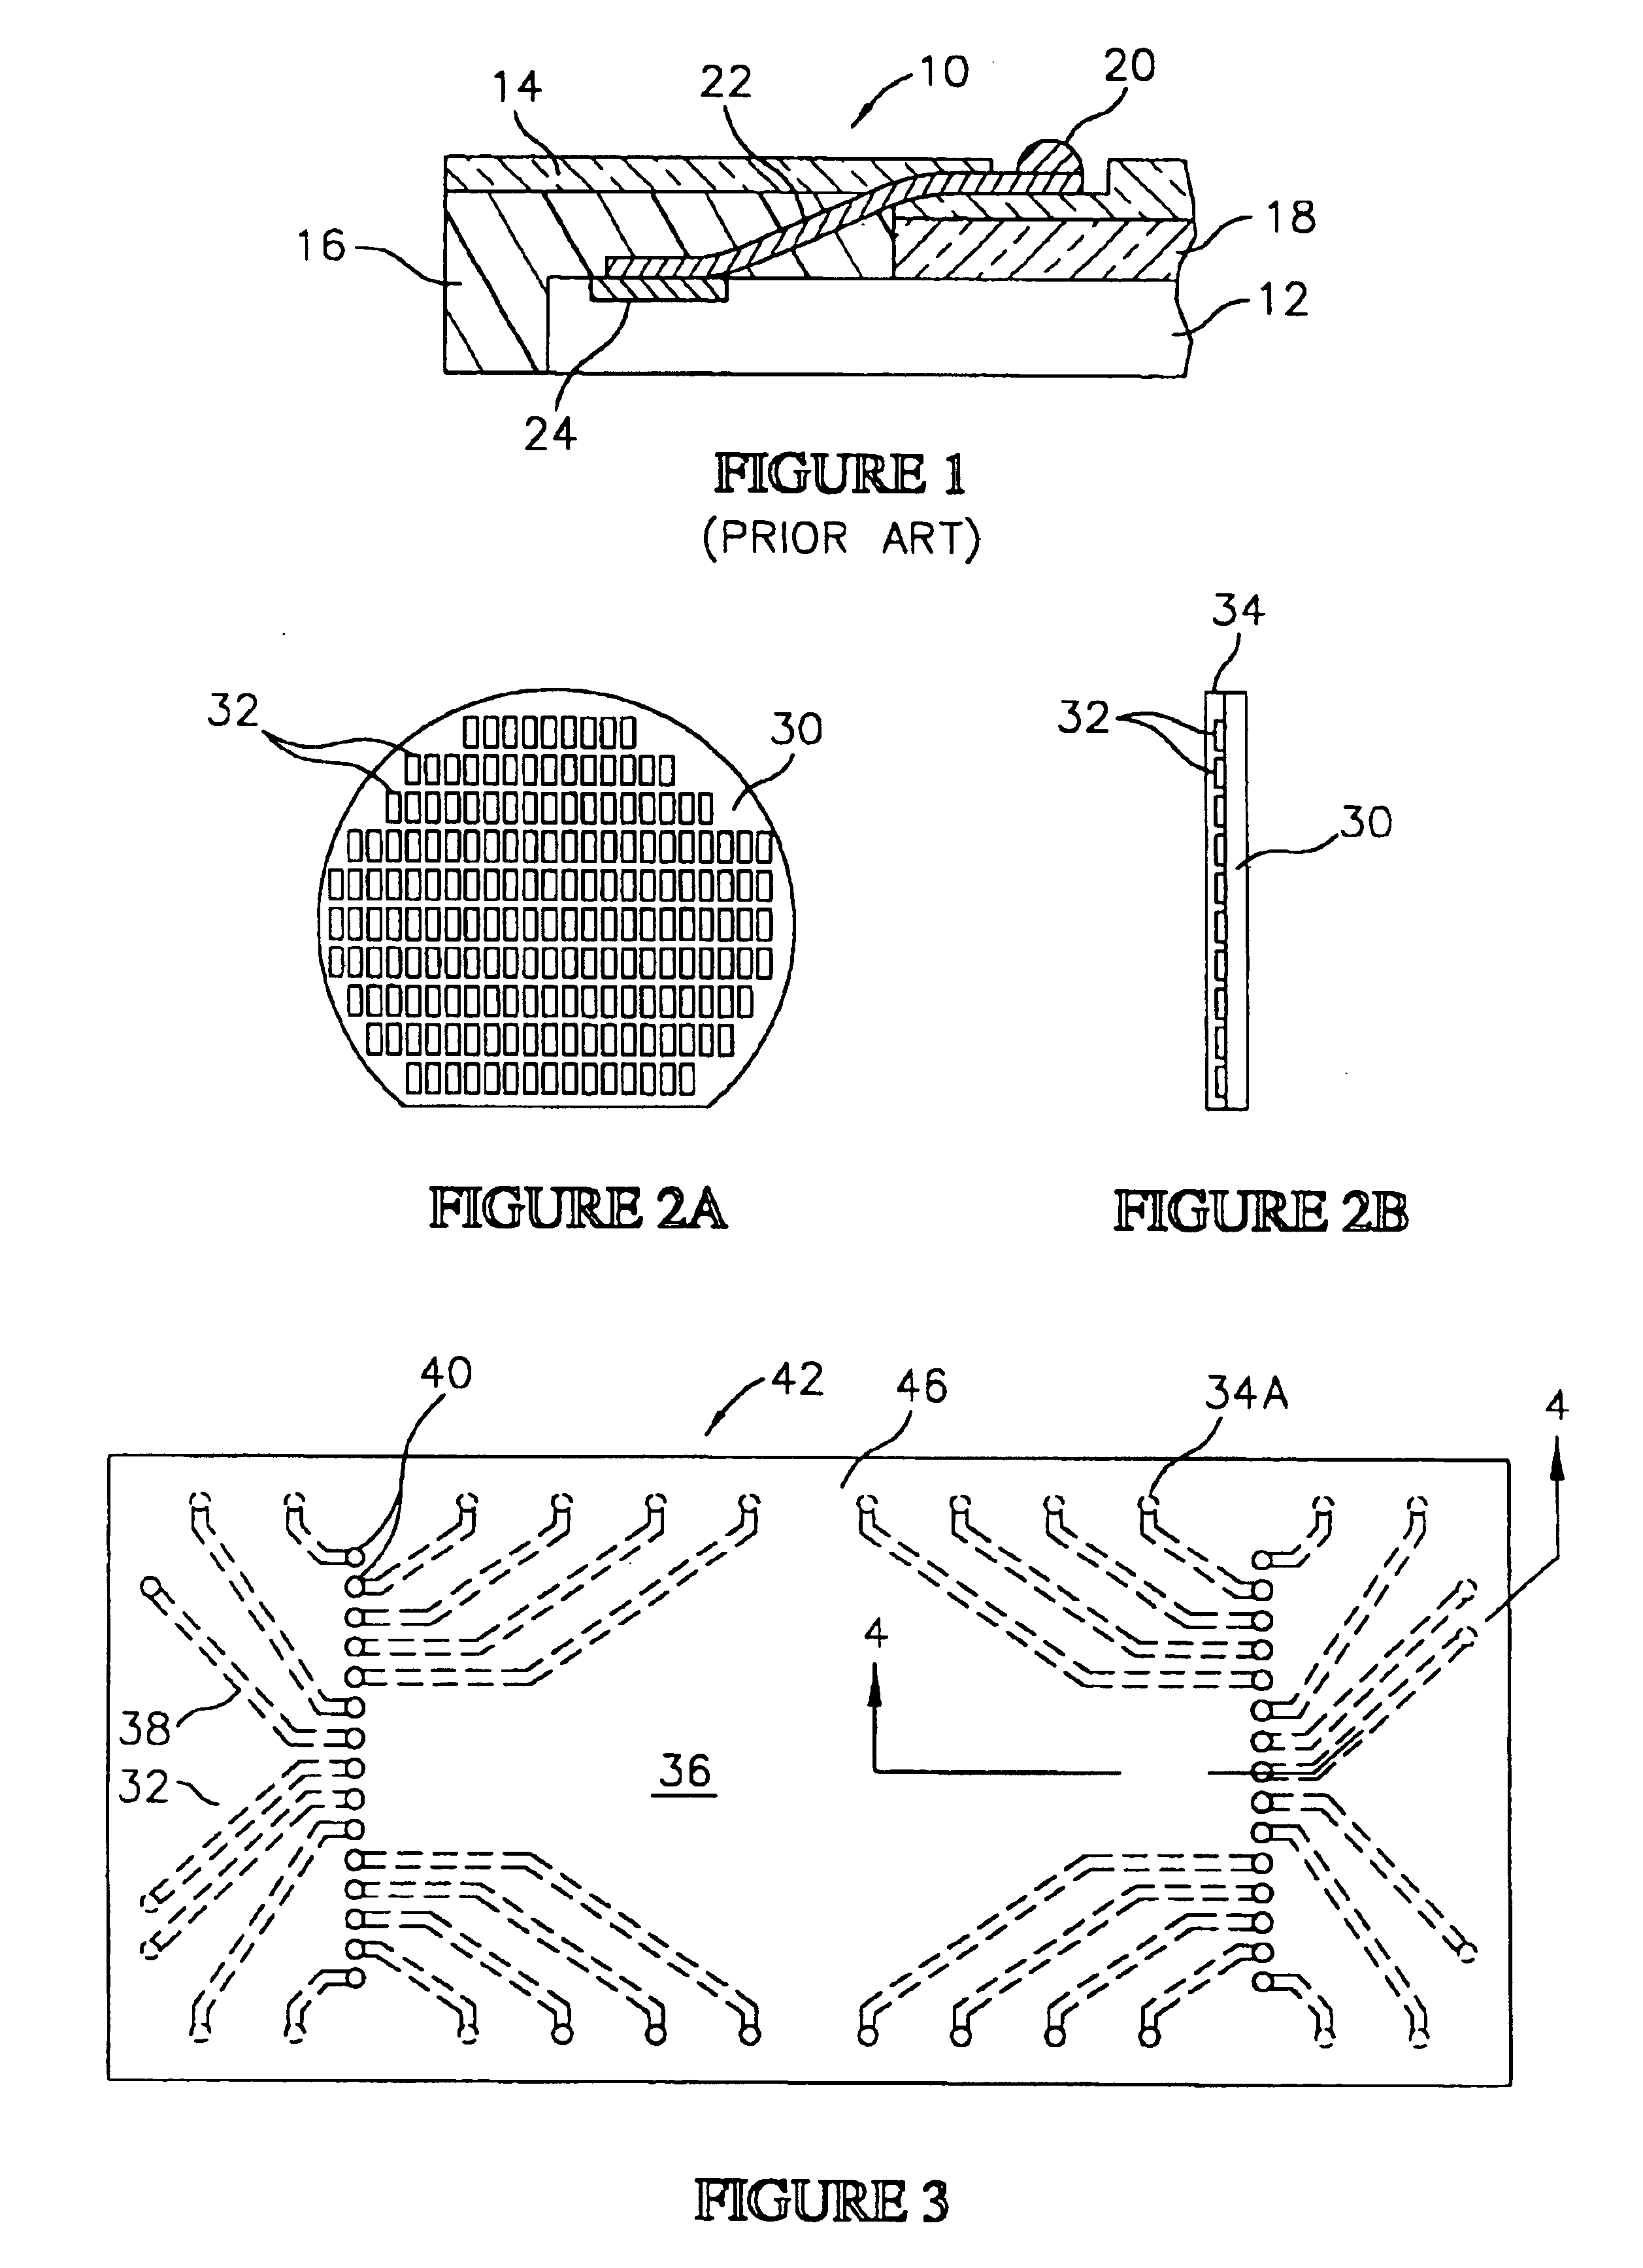 Semiconductor package having flex circuit with external contacts